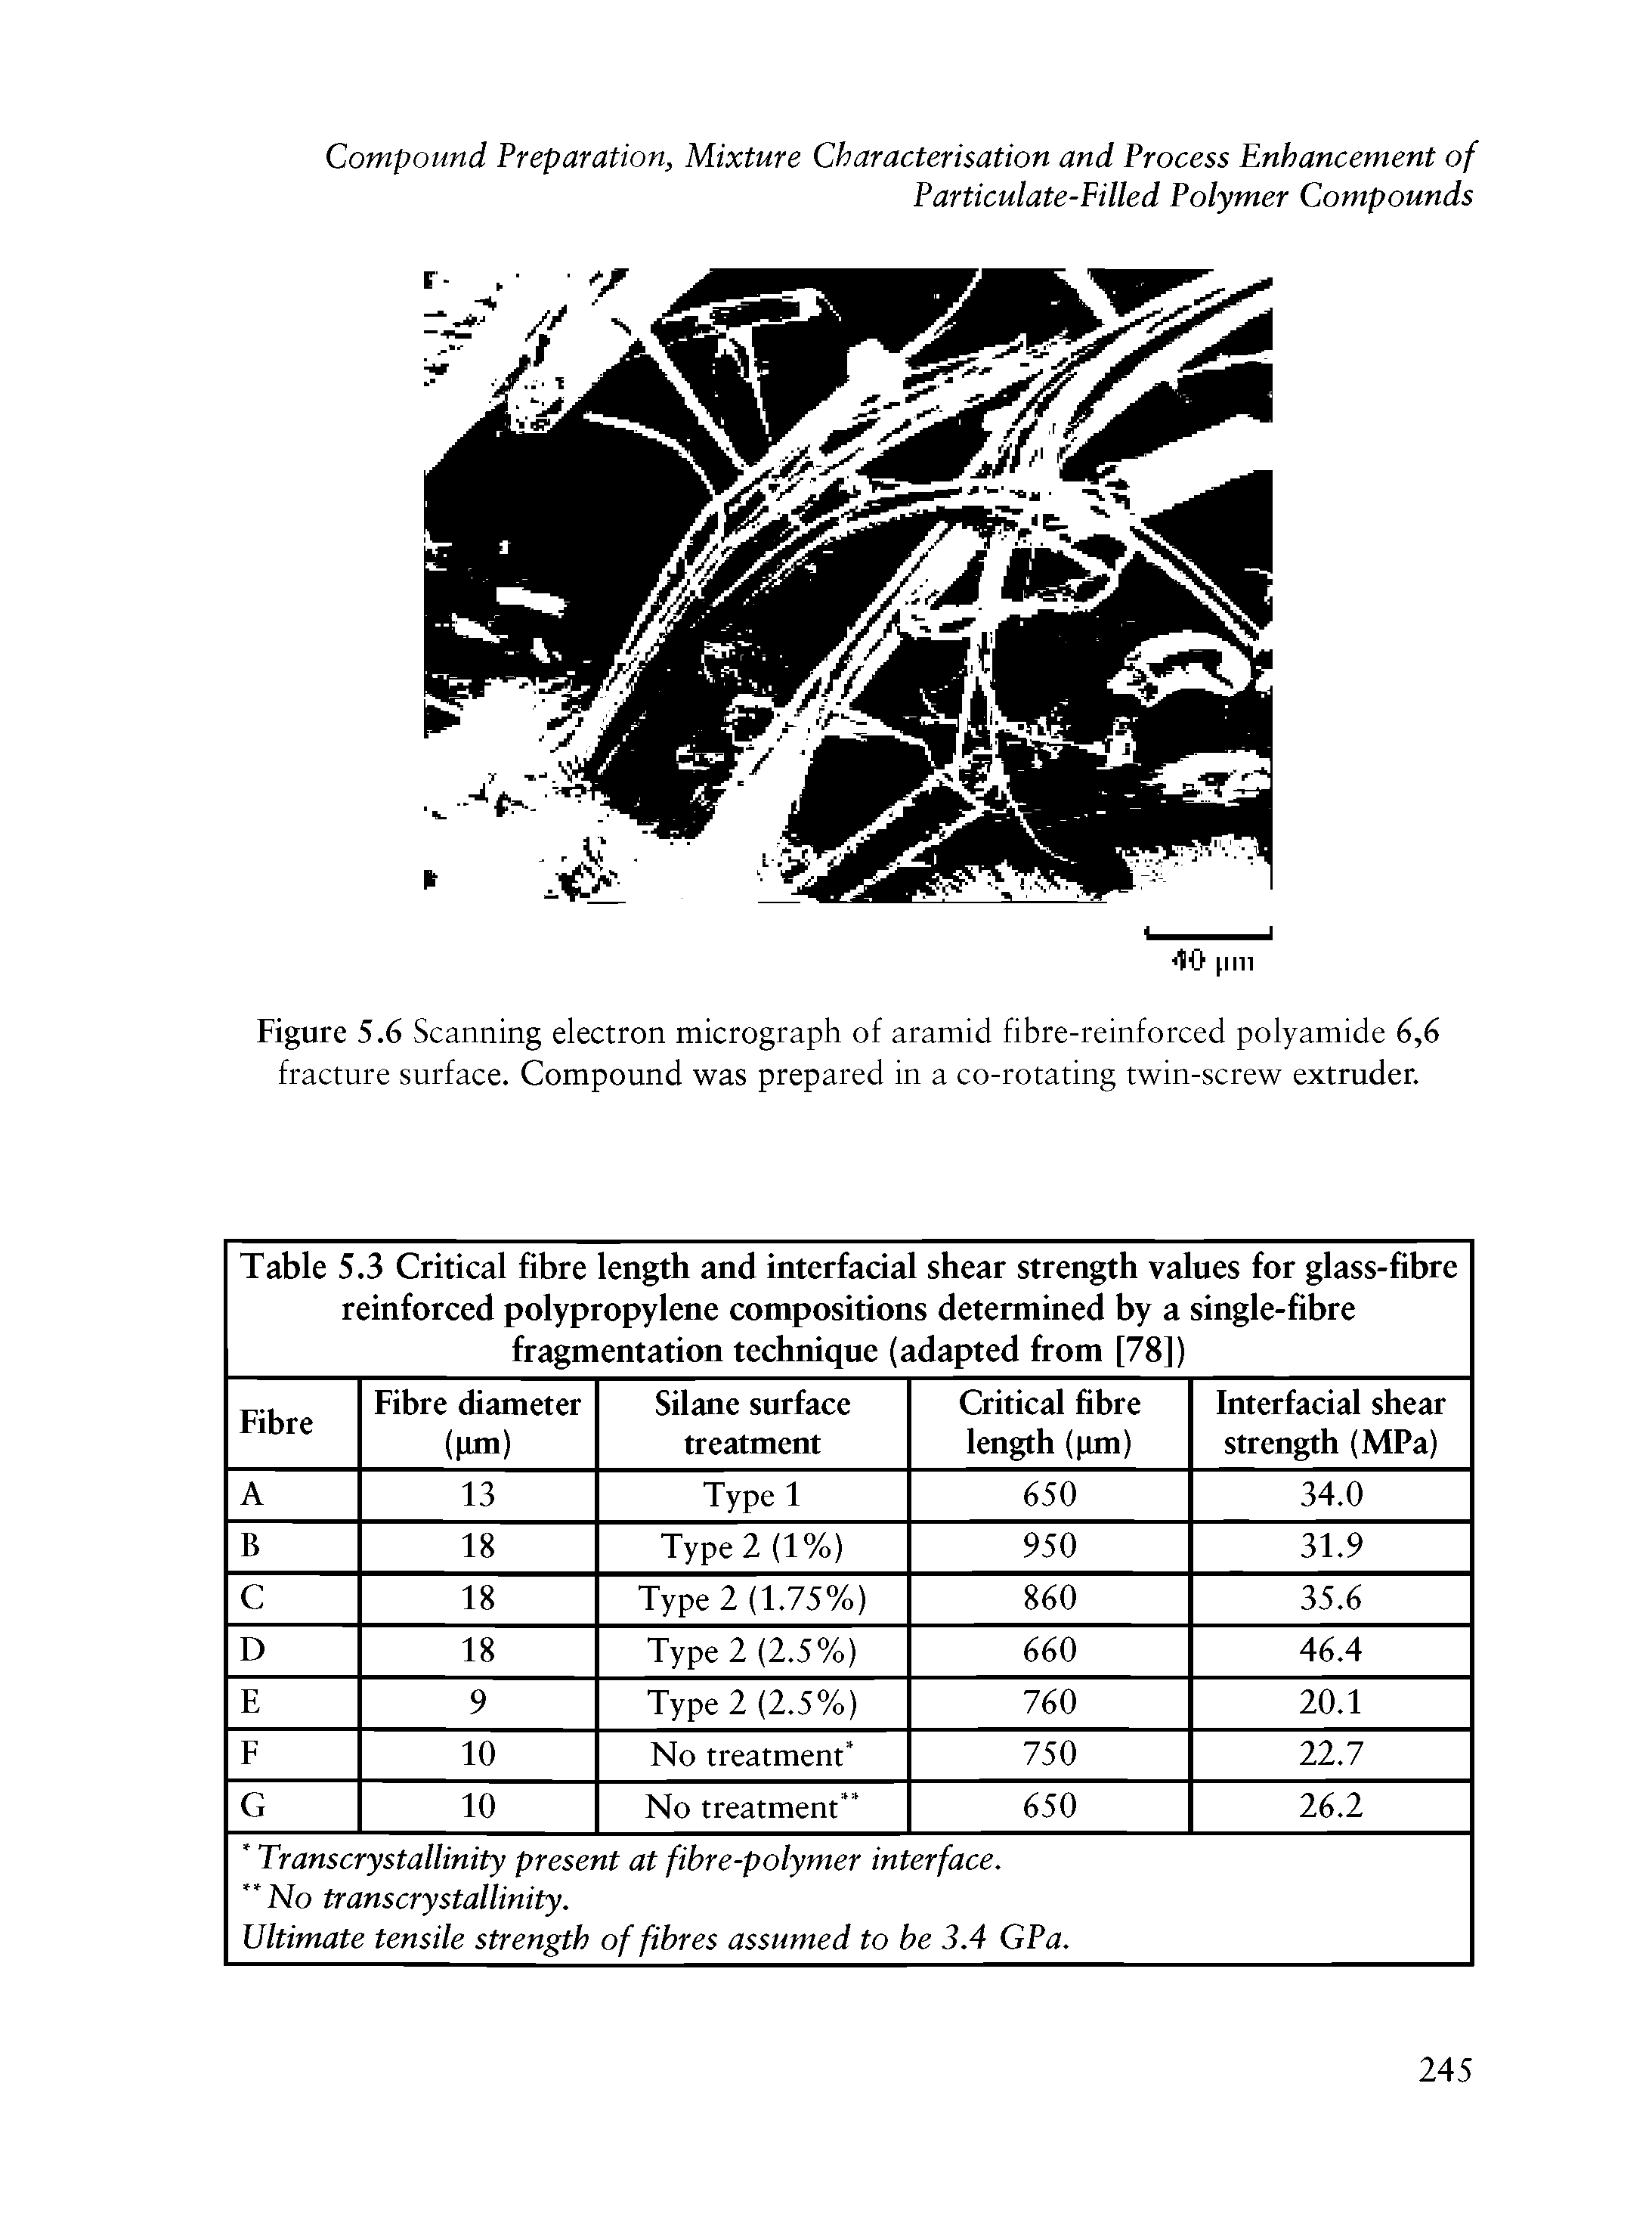 Table 5.3 Critical fibre length and interfadal shear strength values for glass-fibre reinforced polypropylene compositions determined by a single-fibre fragmentation technique (adapted from [78]) ...